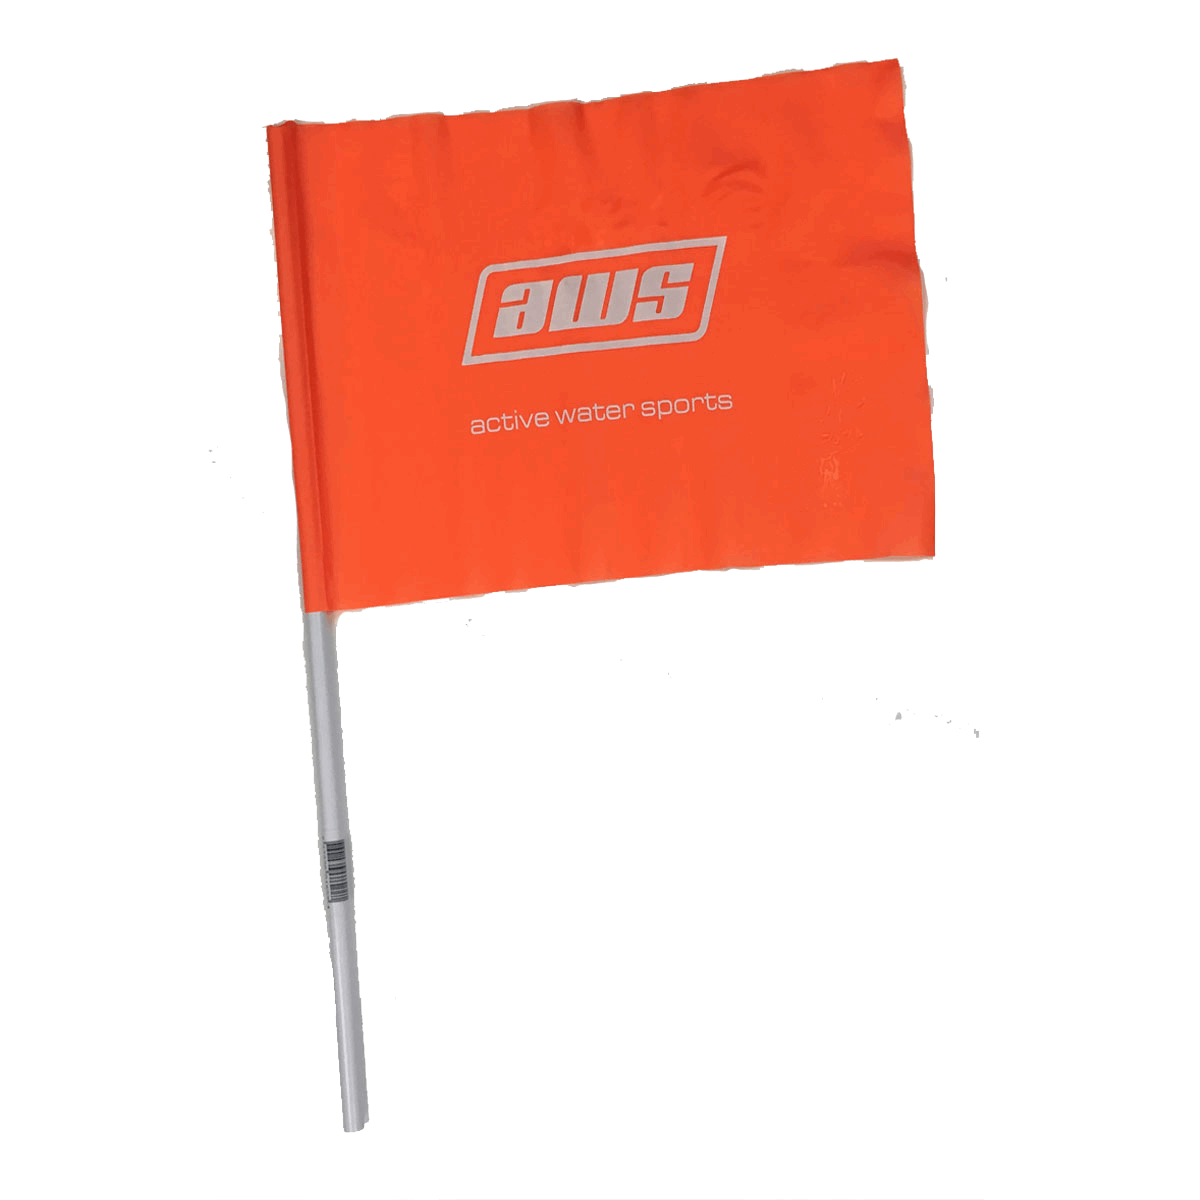 An ActiveWake Skier Down Flag with the word ods on it.